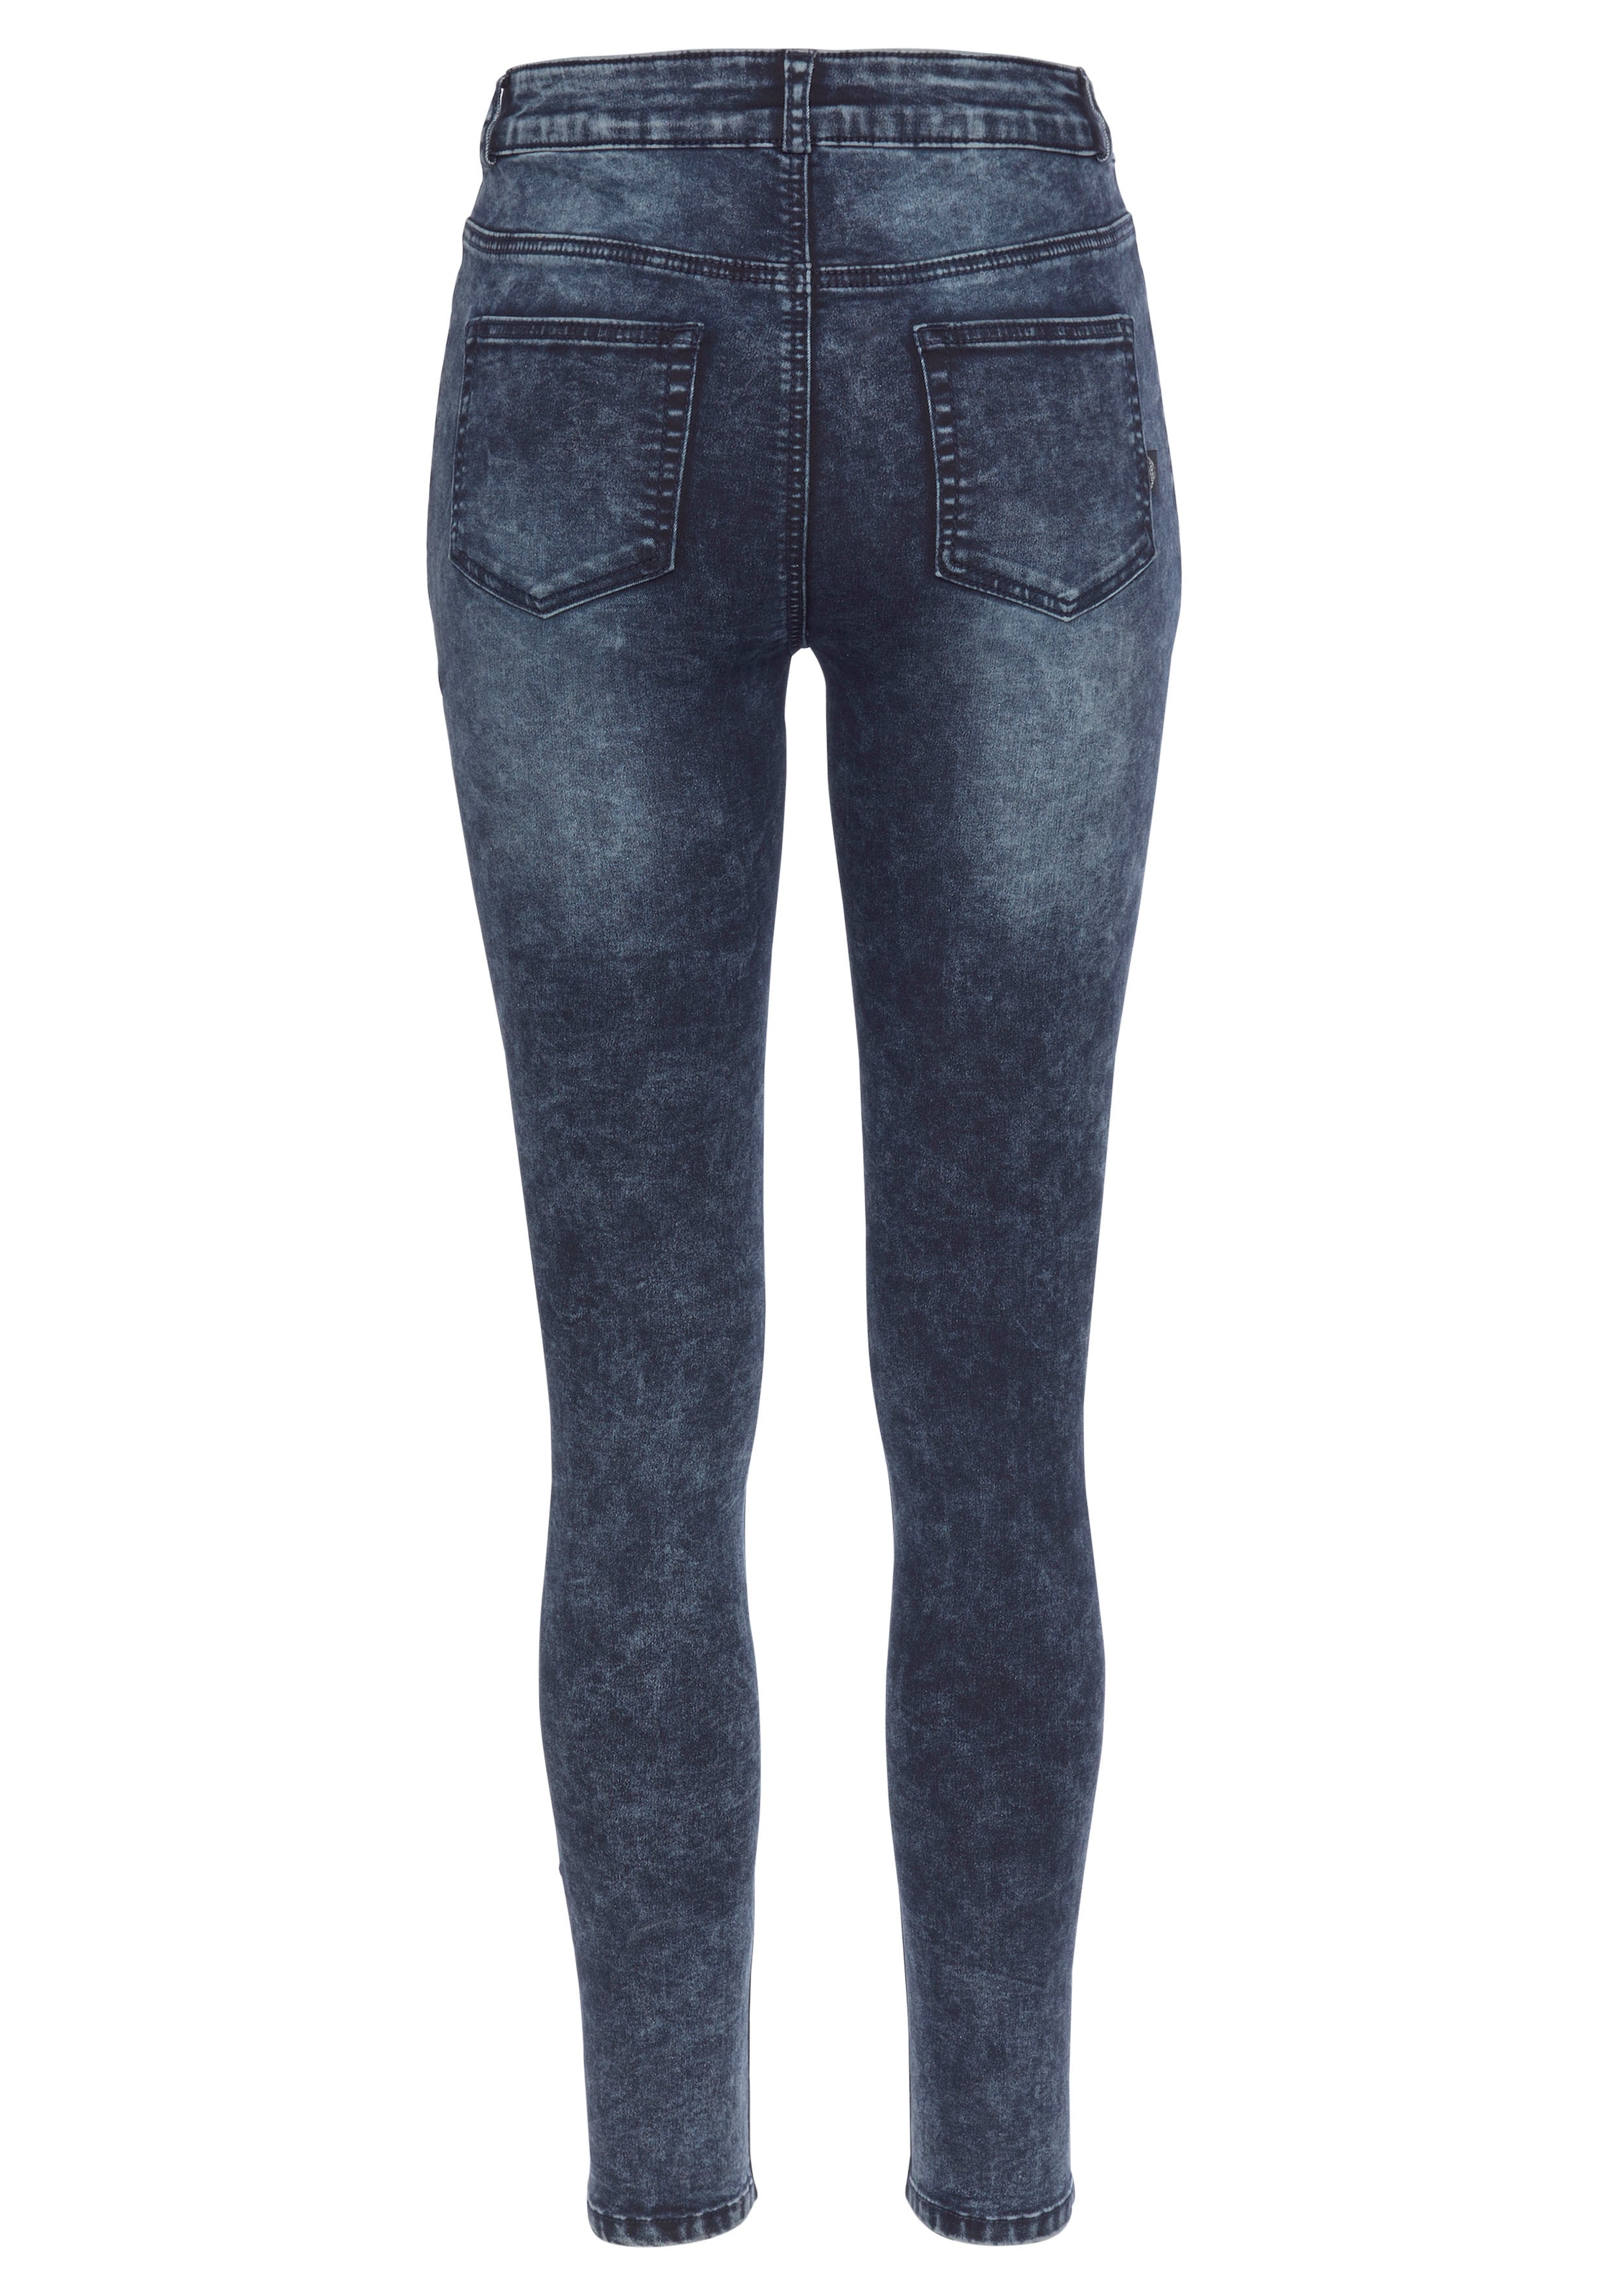 Arizona | Skinny-fit-Jeans walking washed«, Stretch I\'m Moonwashed Jeans shoppen »Ultra moon